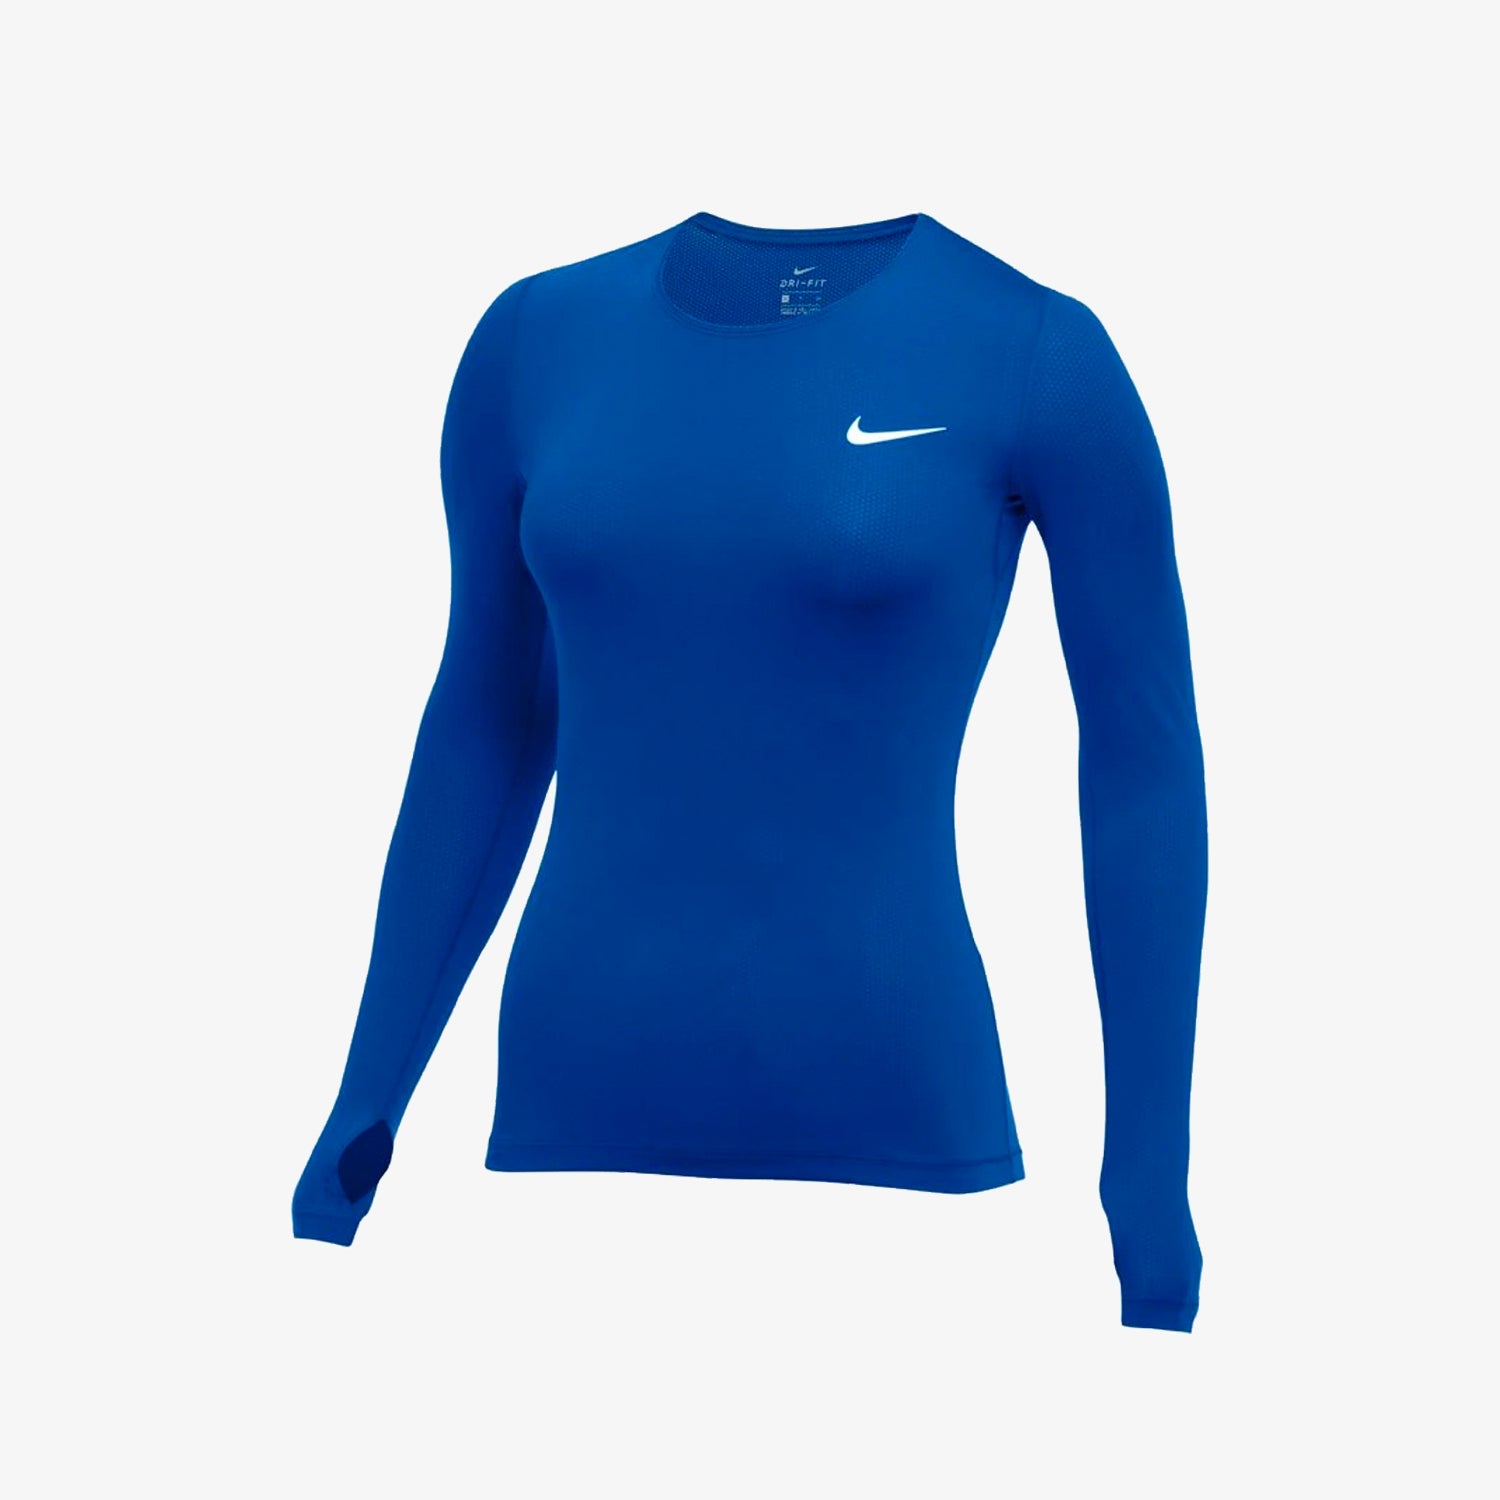 Women's Pro All Over Compression Long-Sleeve Top